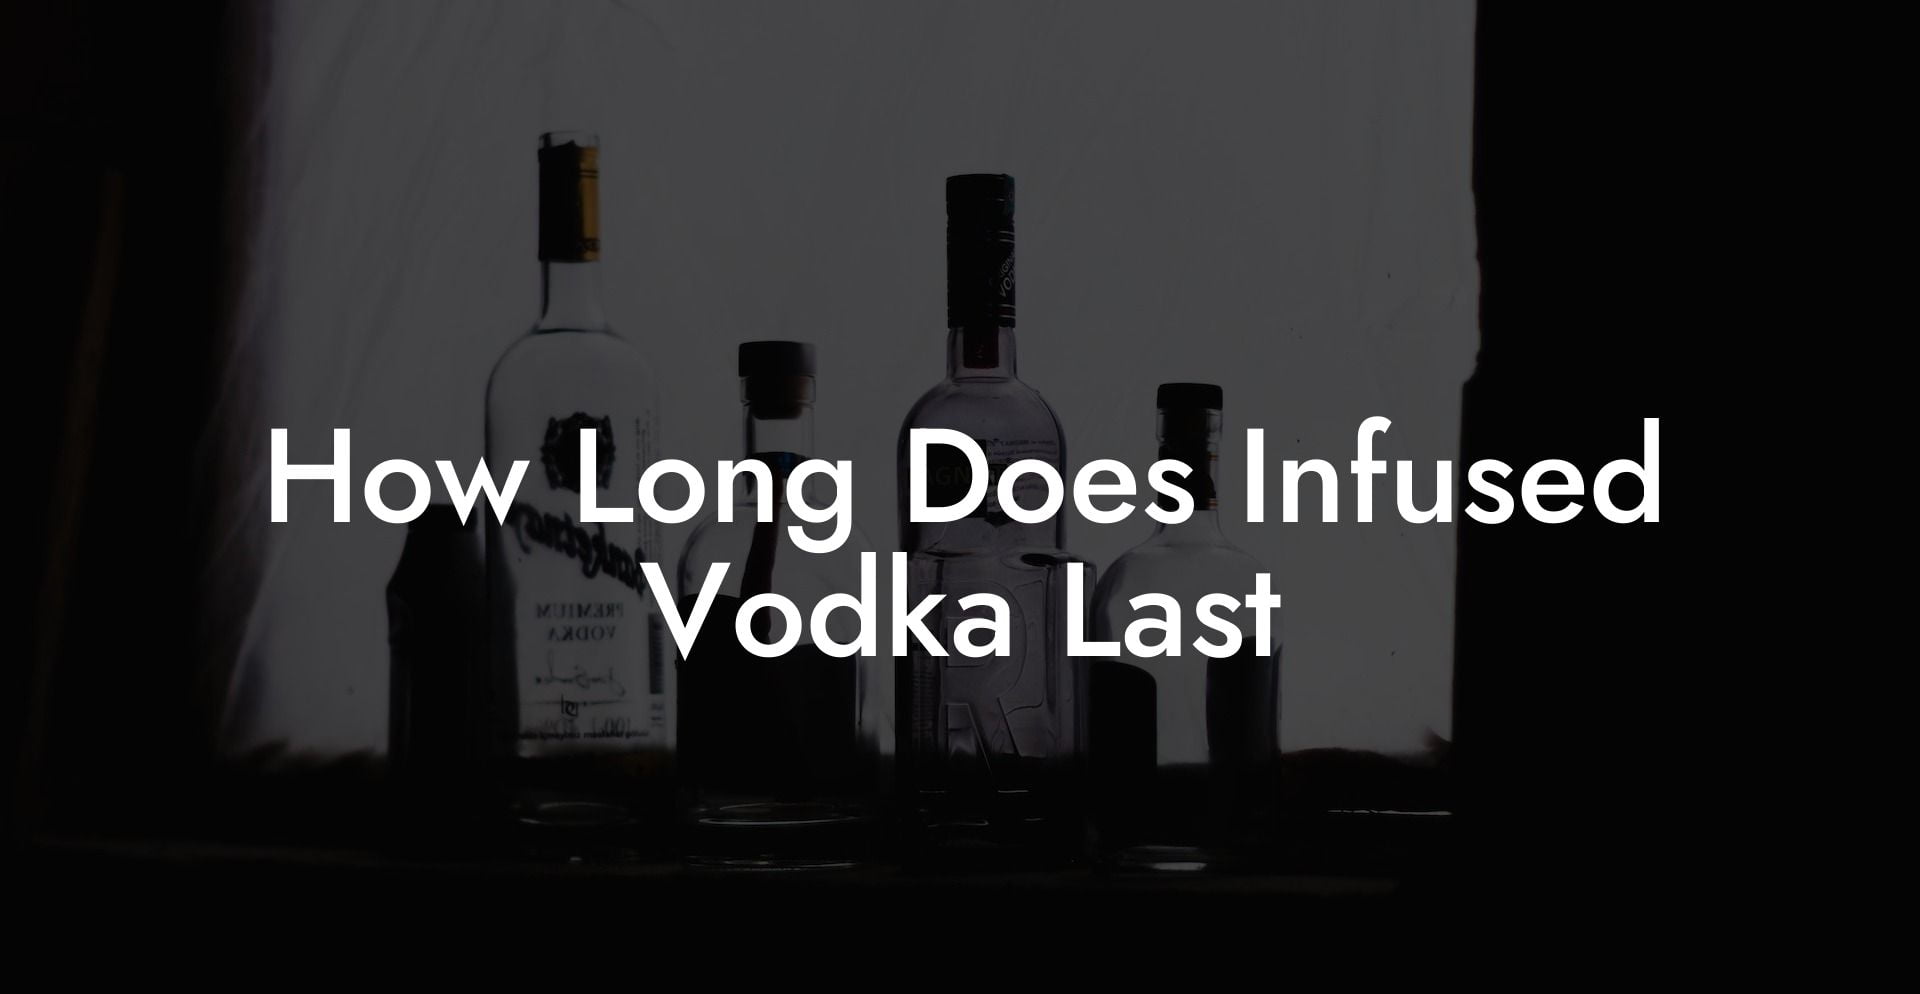 How Long Does Infused Vodka Last